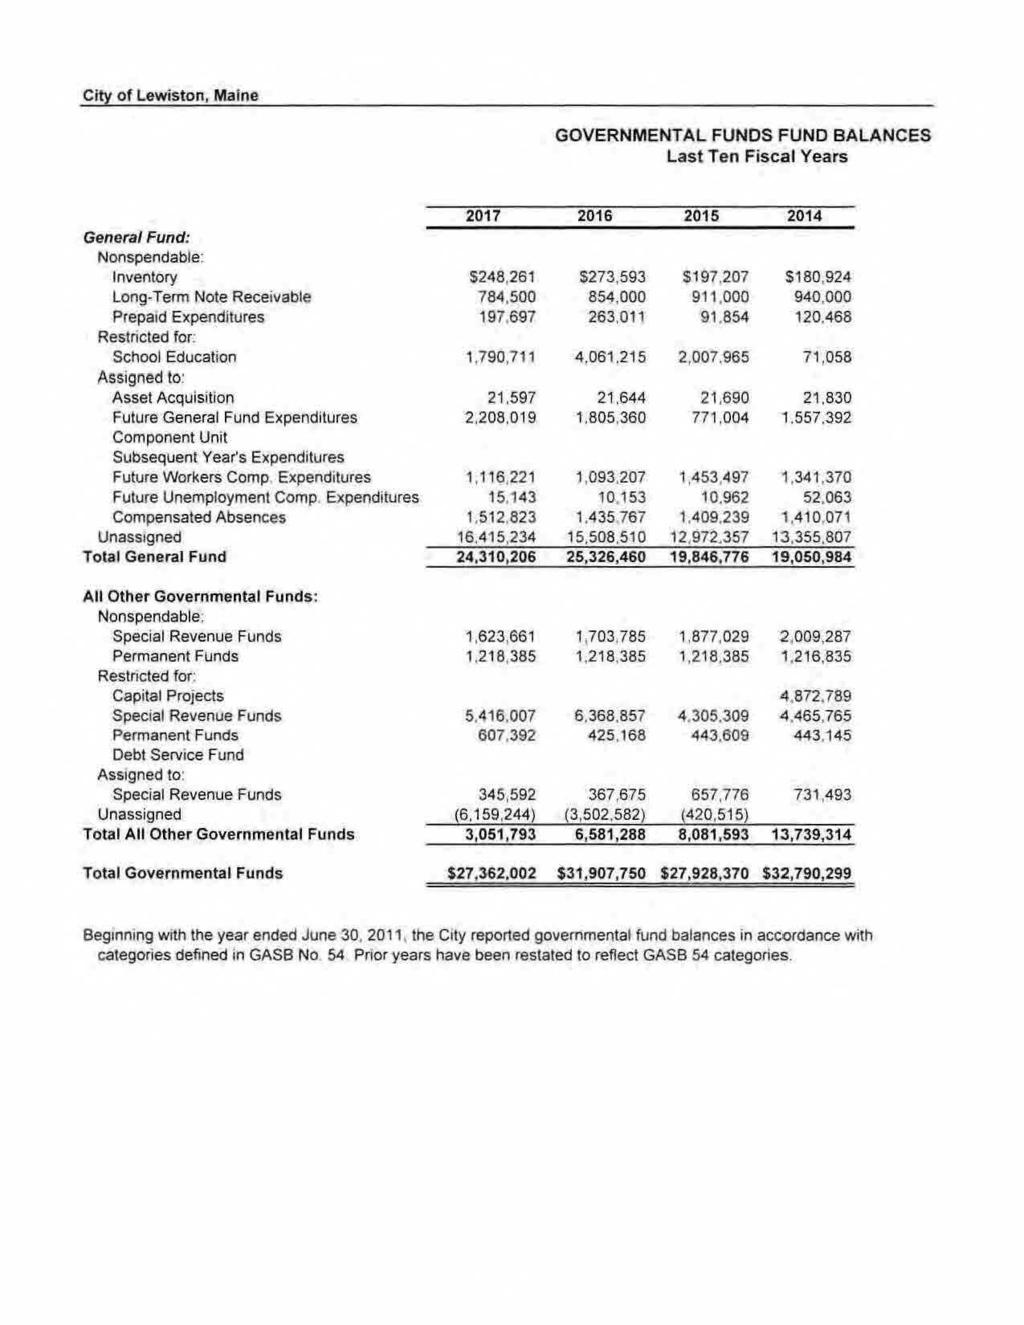 Ct~ Of- LeWiston, Maine GOVERNMENTAL FUNDS FUND BALANCES L ast Ten Fiscal Years 2011 2016 2015 2014 Genetal Fund: Nonspendable: Inventory $248,261.